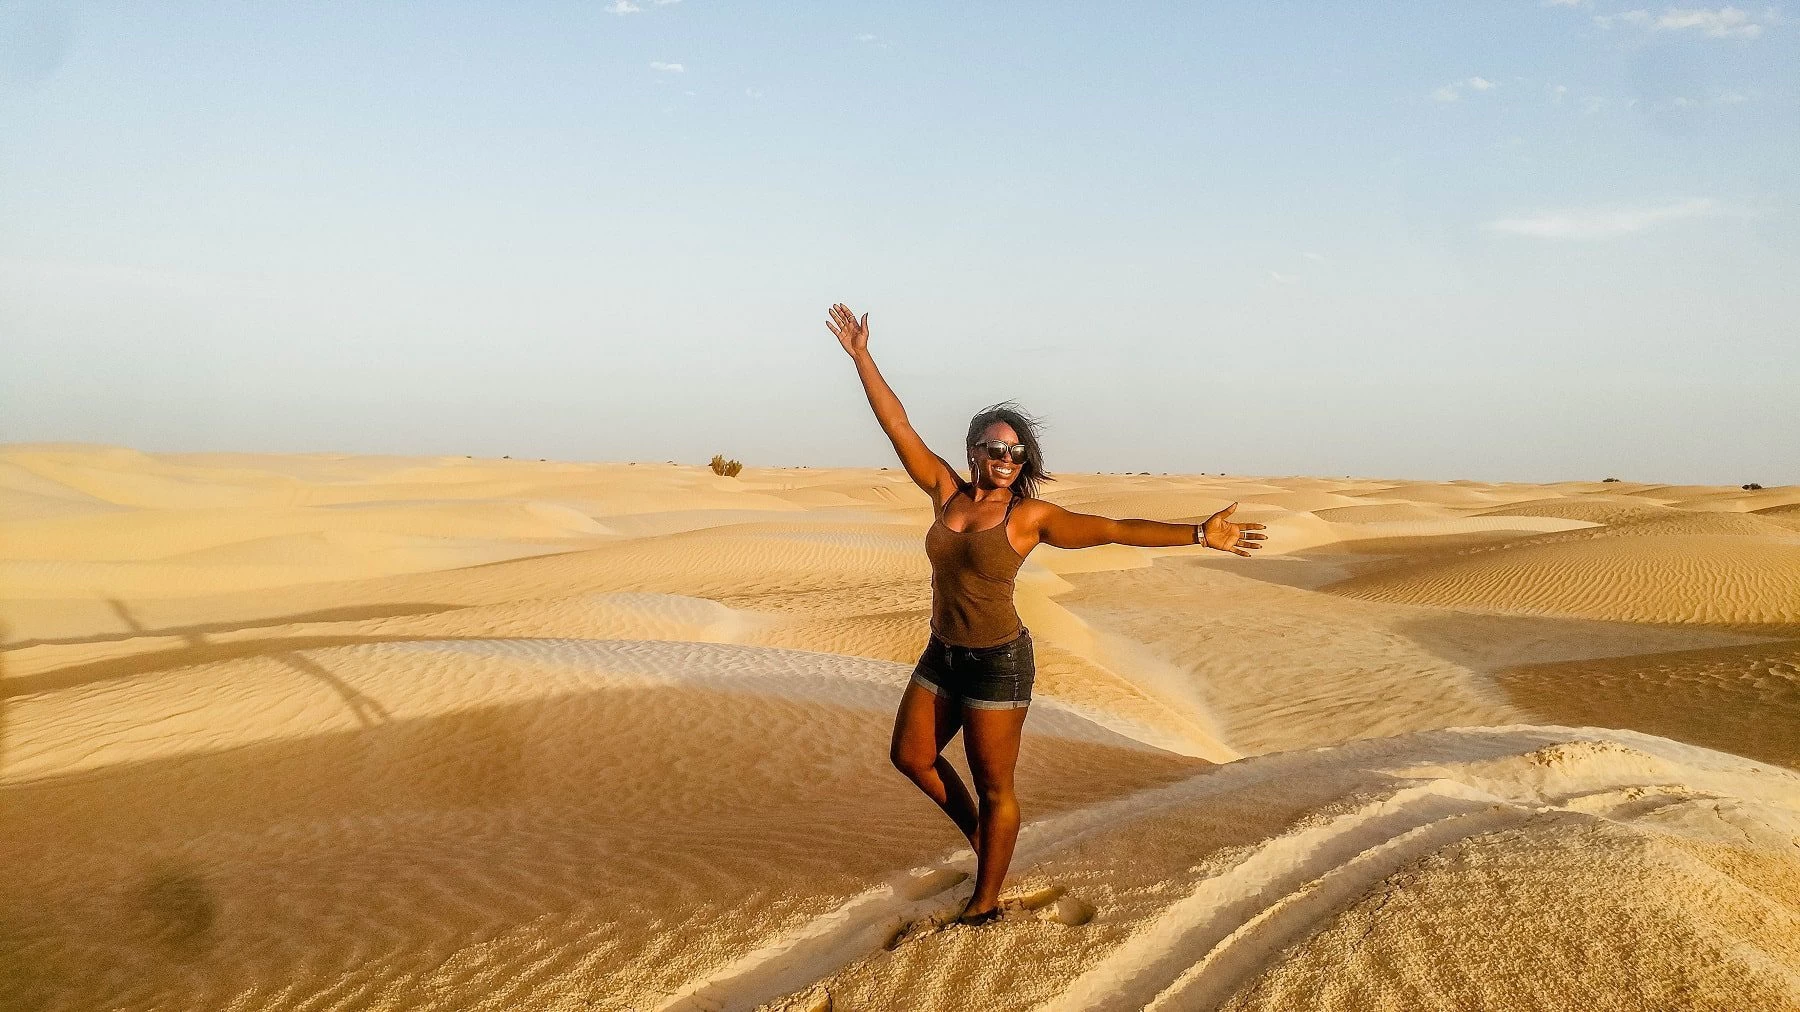 Feeling high on life after running up and down the sand dunes in the Sahara desert